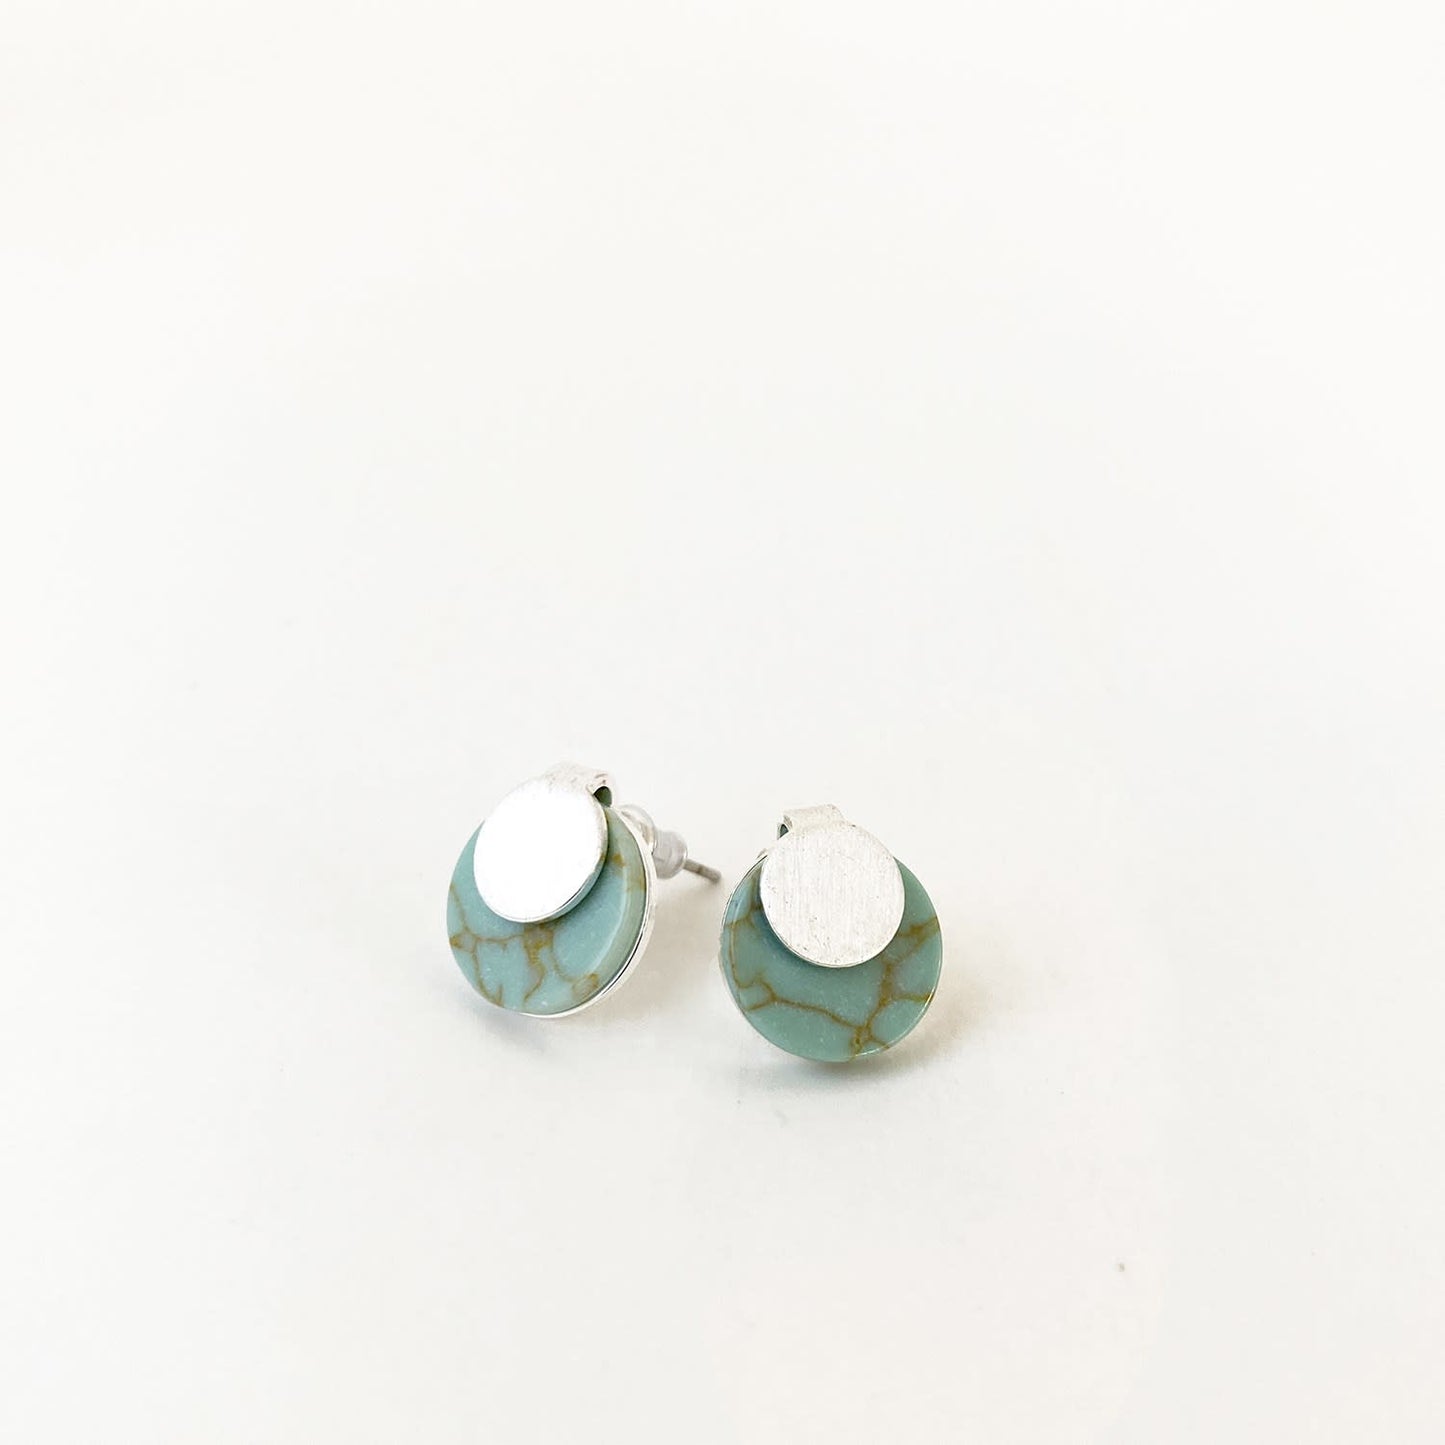 Caracol Turquoise & Silver Real Stone & Metal Earrings 2477-TRQ-S